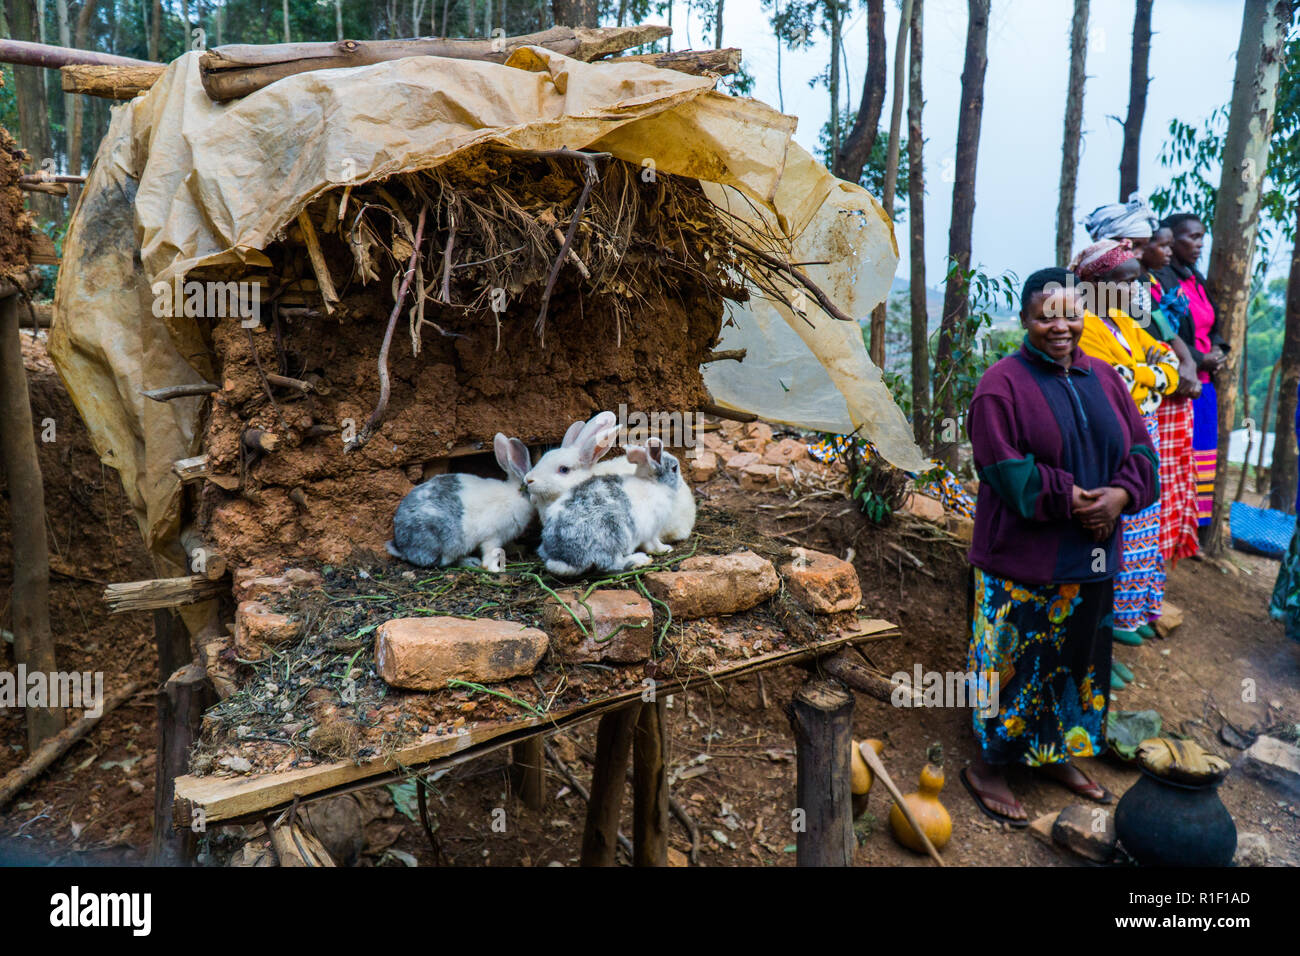 Villagers in Uganda and House Rabbits Stock Photo